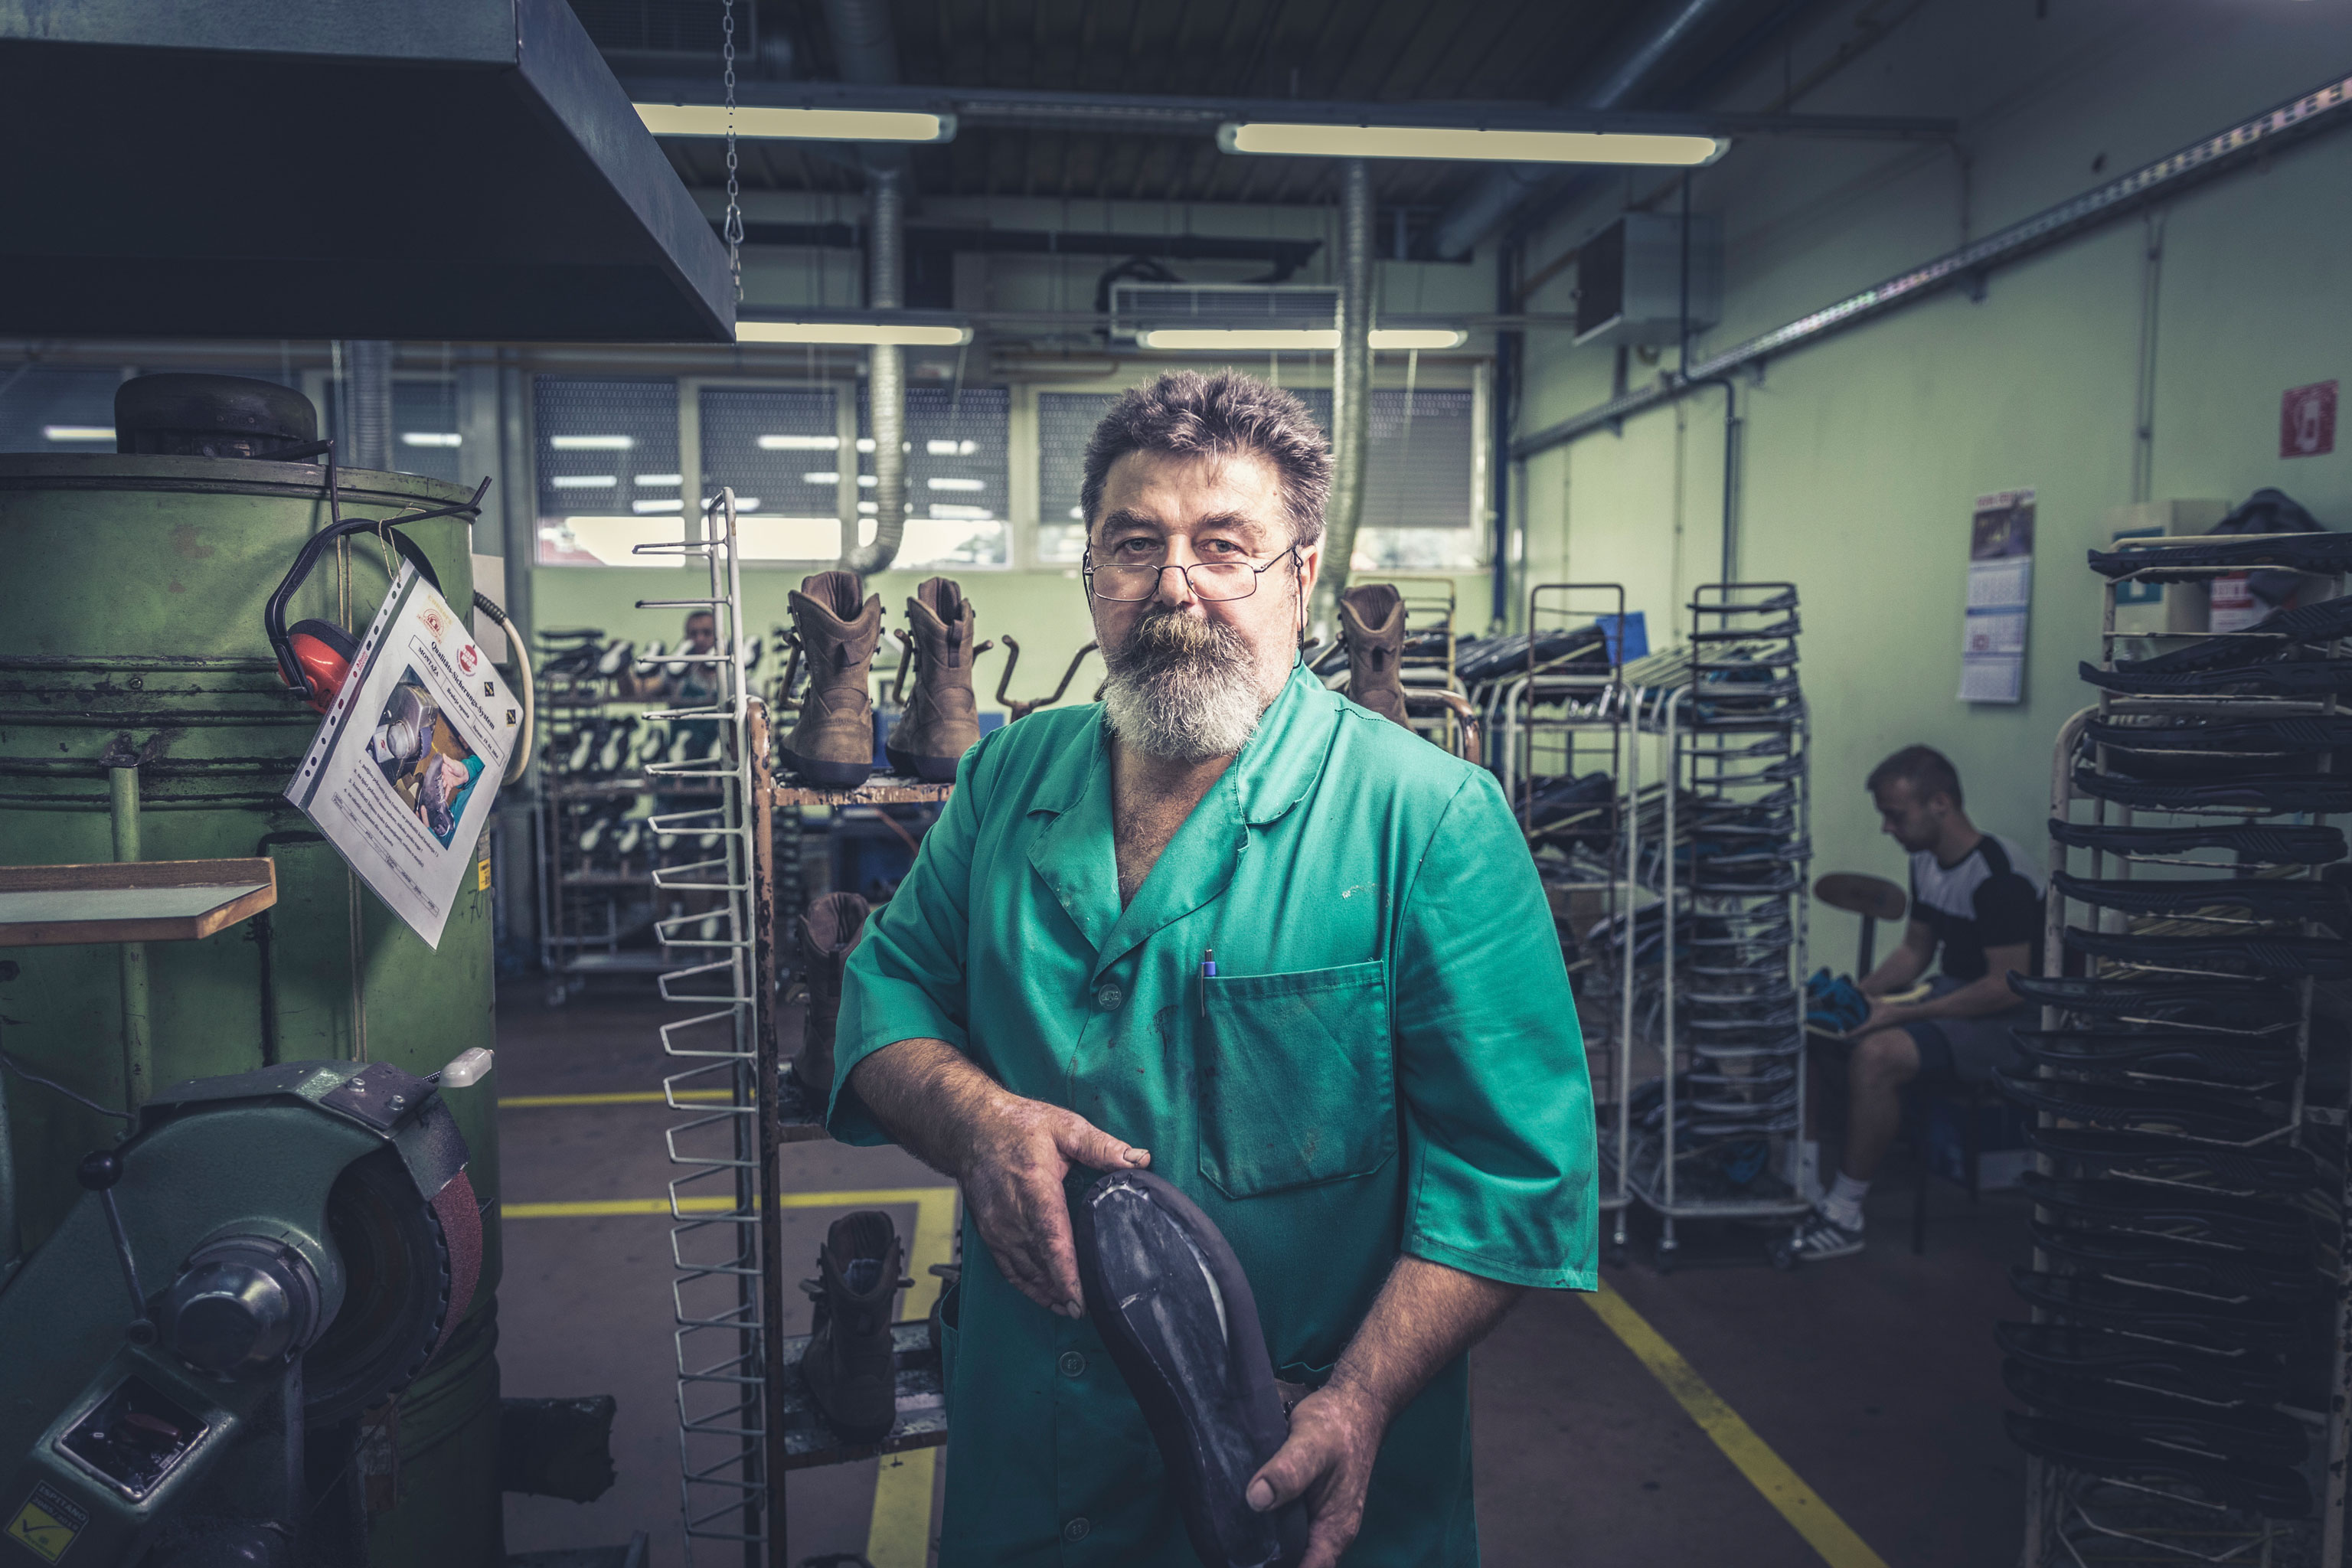 Photo portrait: Stanko, a worker at the Hanwag production site in Croatia